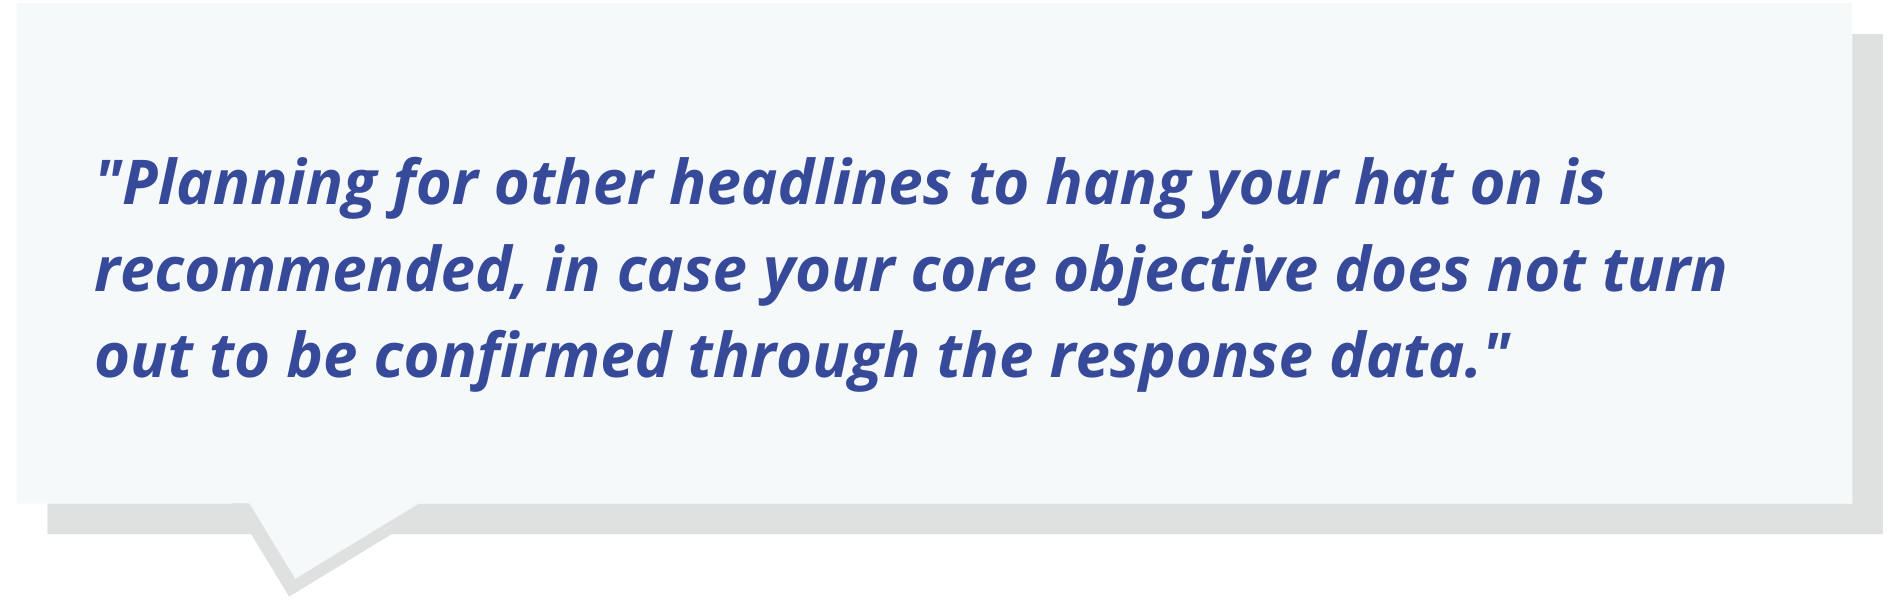 Quote Text: Planning for other headlines to hang your hat on is recommended, in case your core objective does not turn out to be confirmed through the response data.